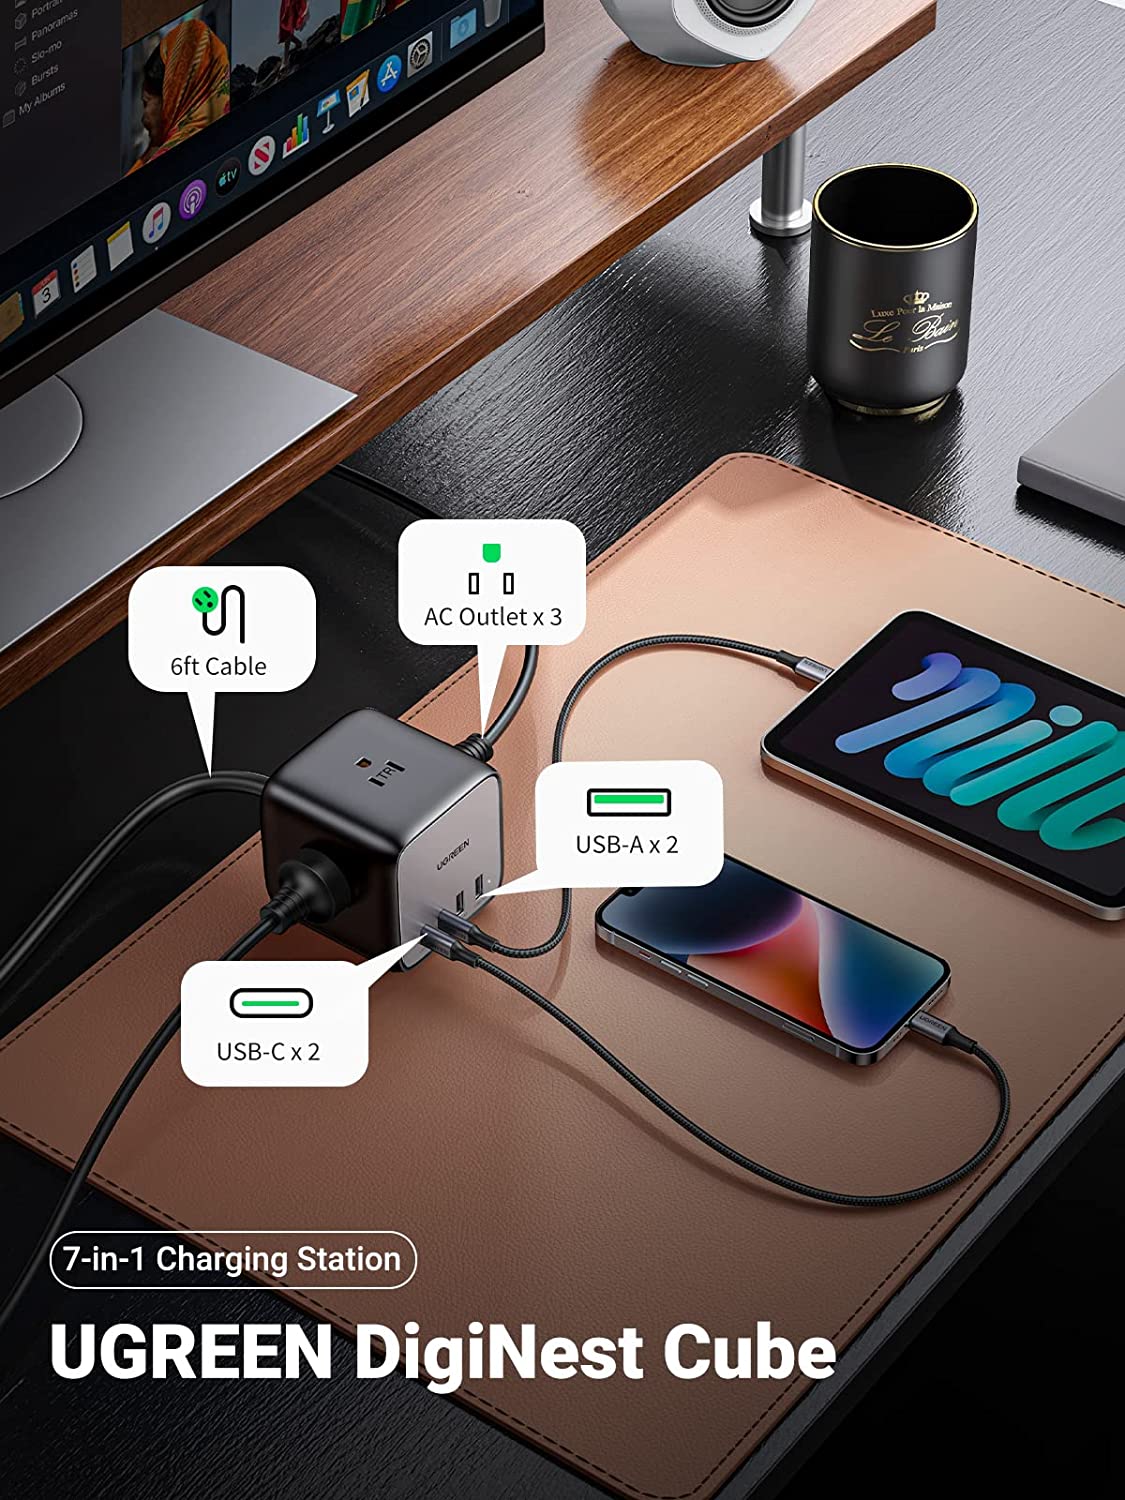 Deal: Ugreen's tiny 65W USB-C GaN charger can be yours for RM92